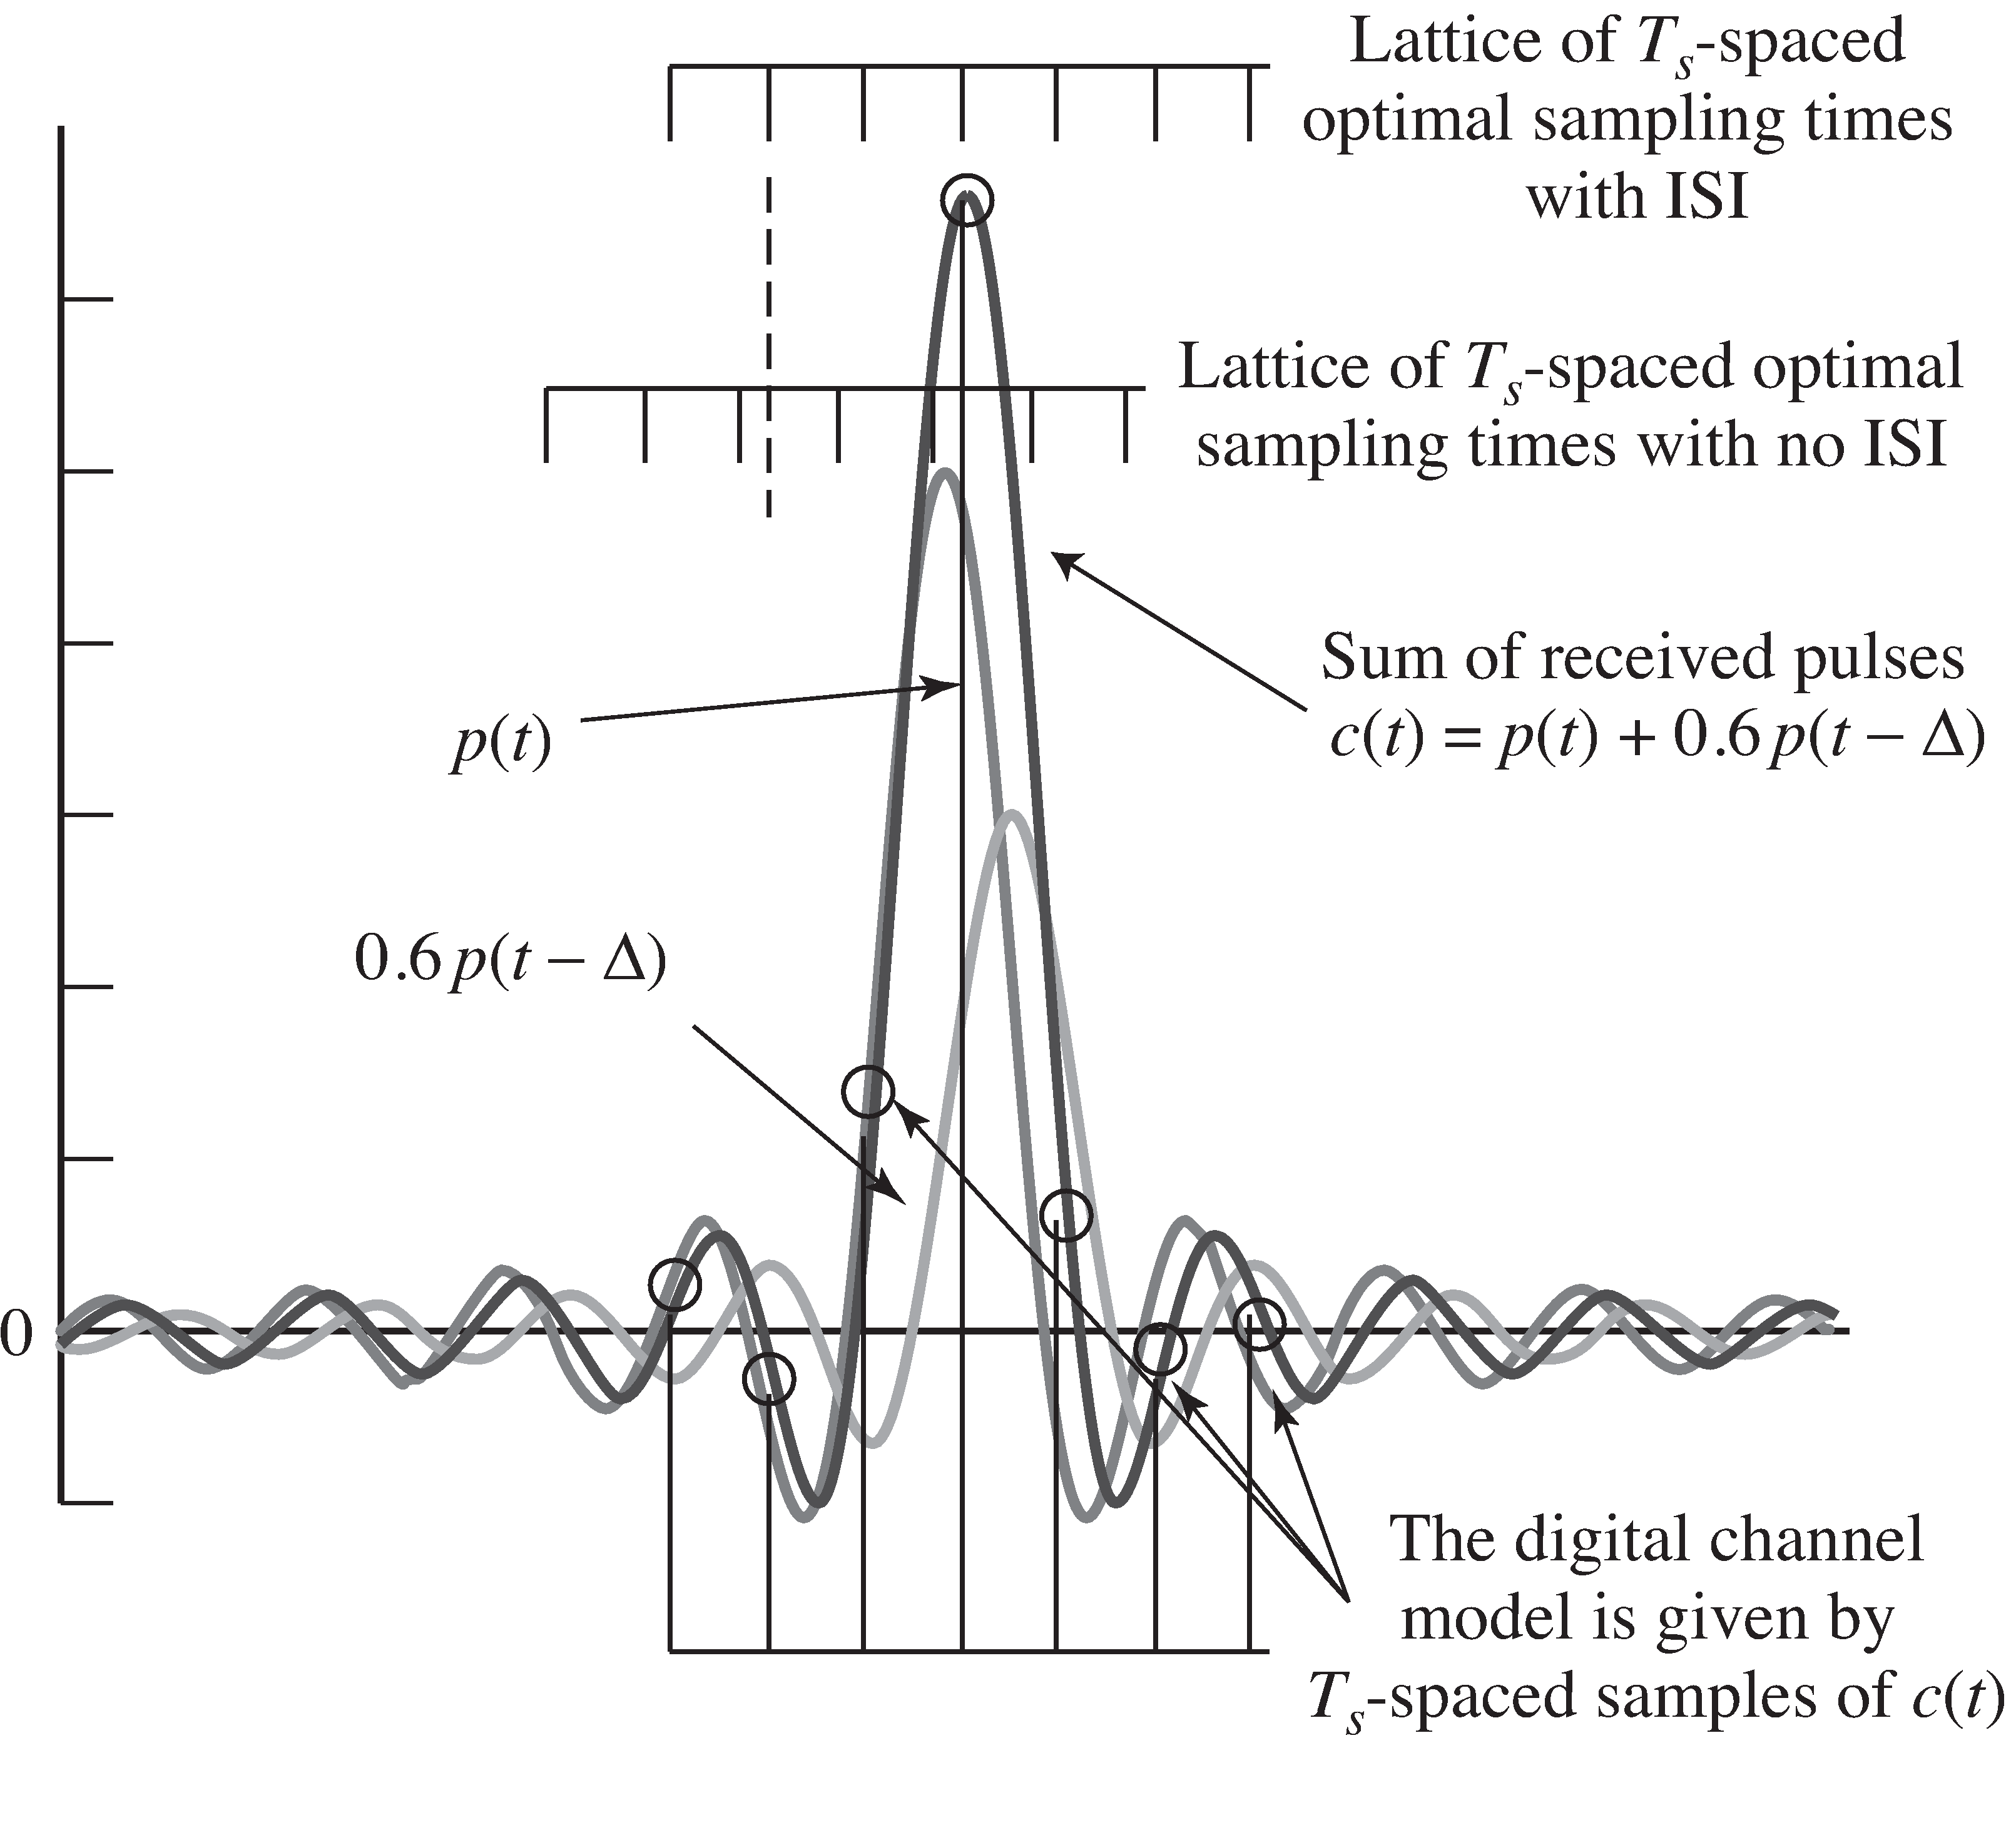 The optimum sampling times (as found by the energy maximization algorithm) differ when there is ISI in the transmission path, and change the effective digital model of the channel.